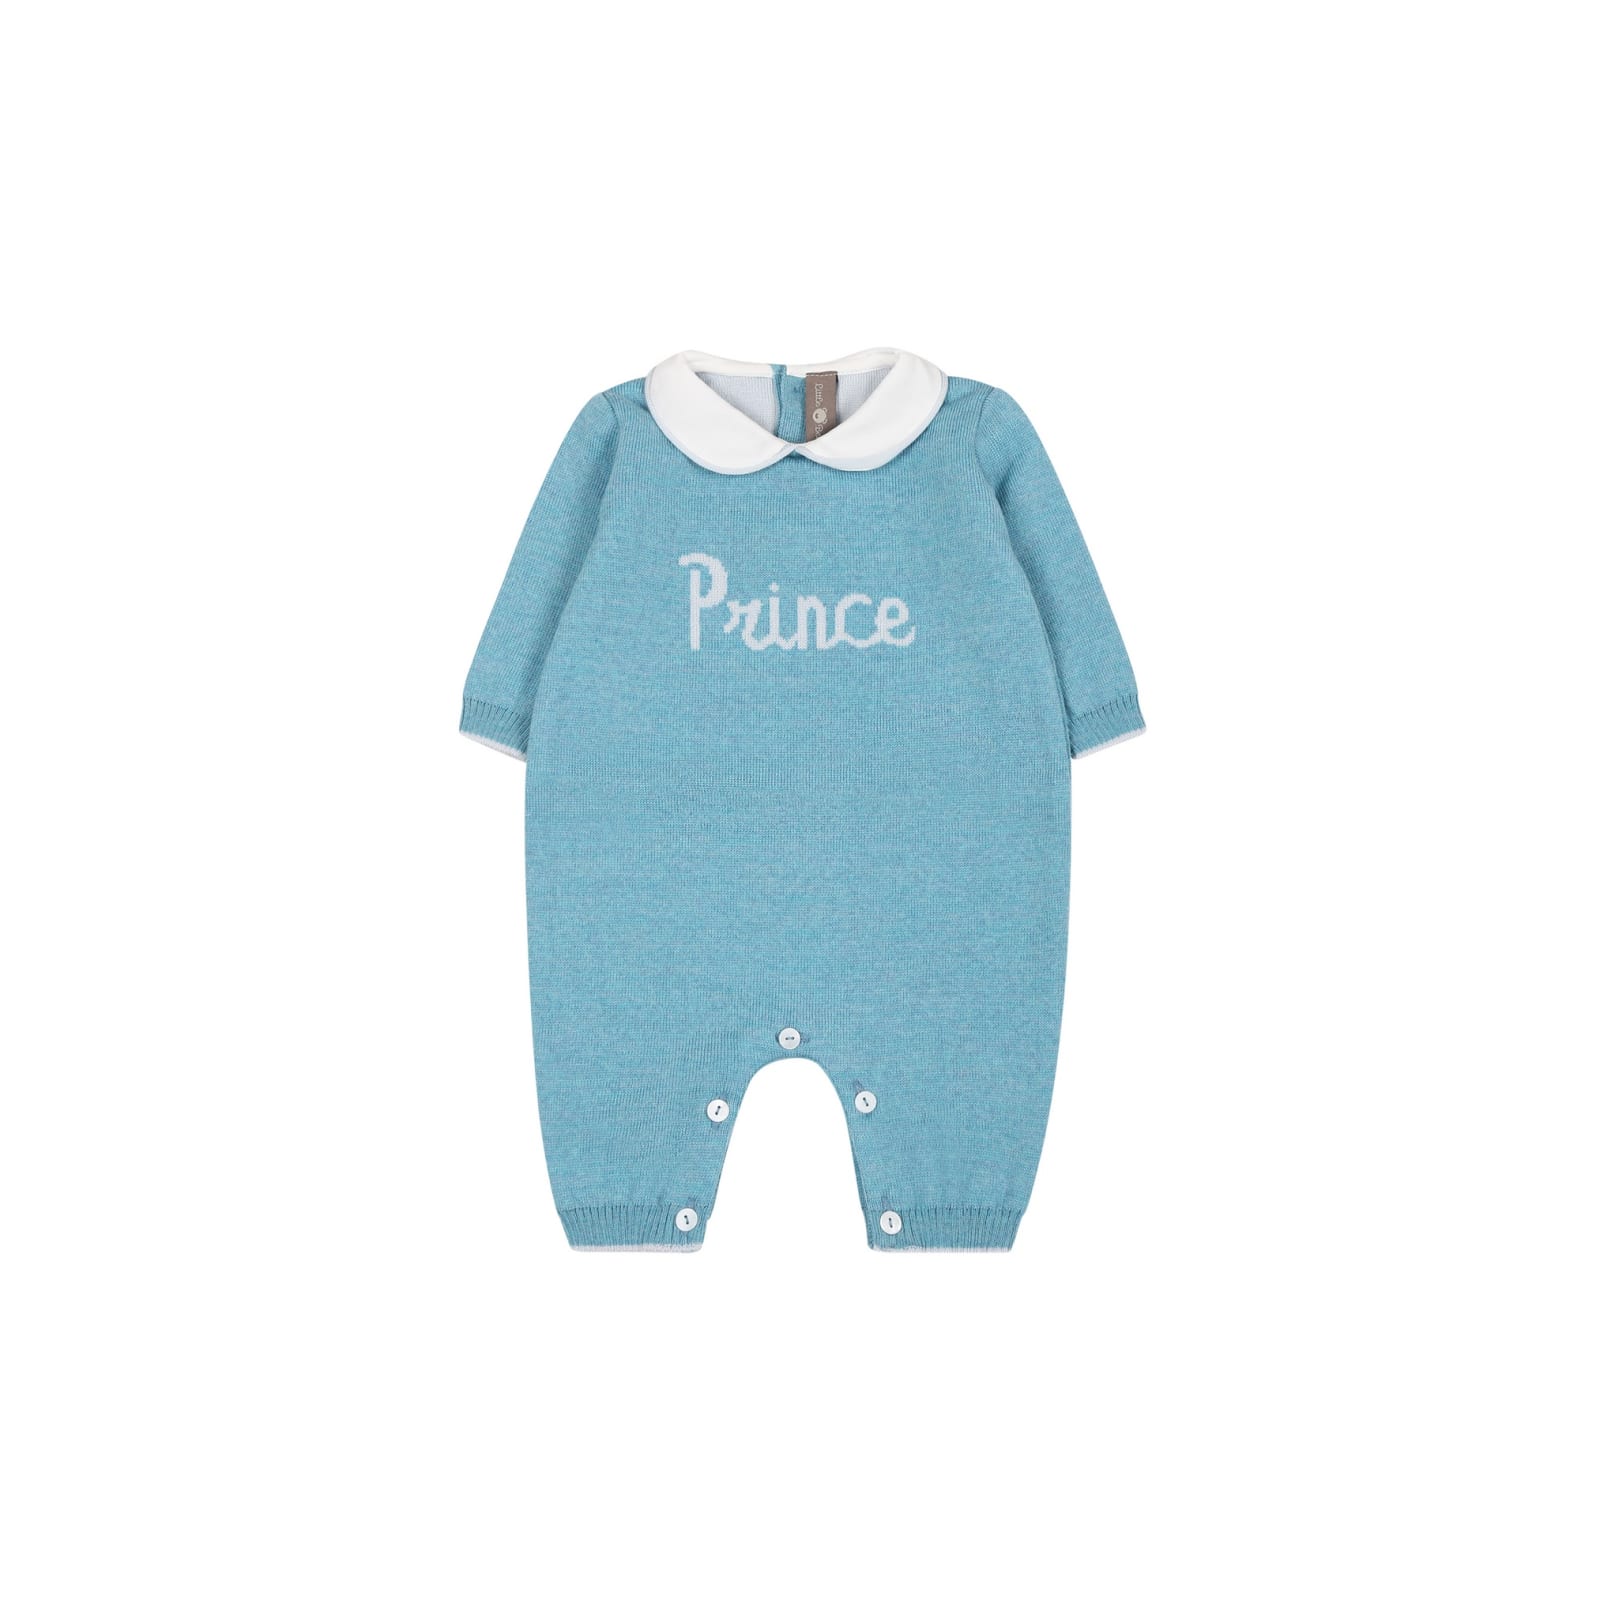 Little Bear Light Blue Babygrown For Baby Boy With Embroidered Prince Writing